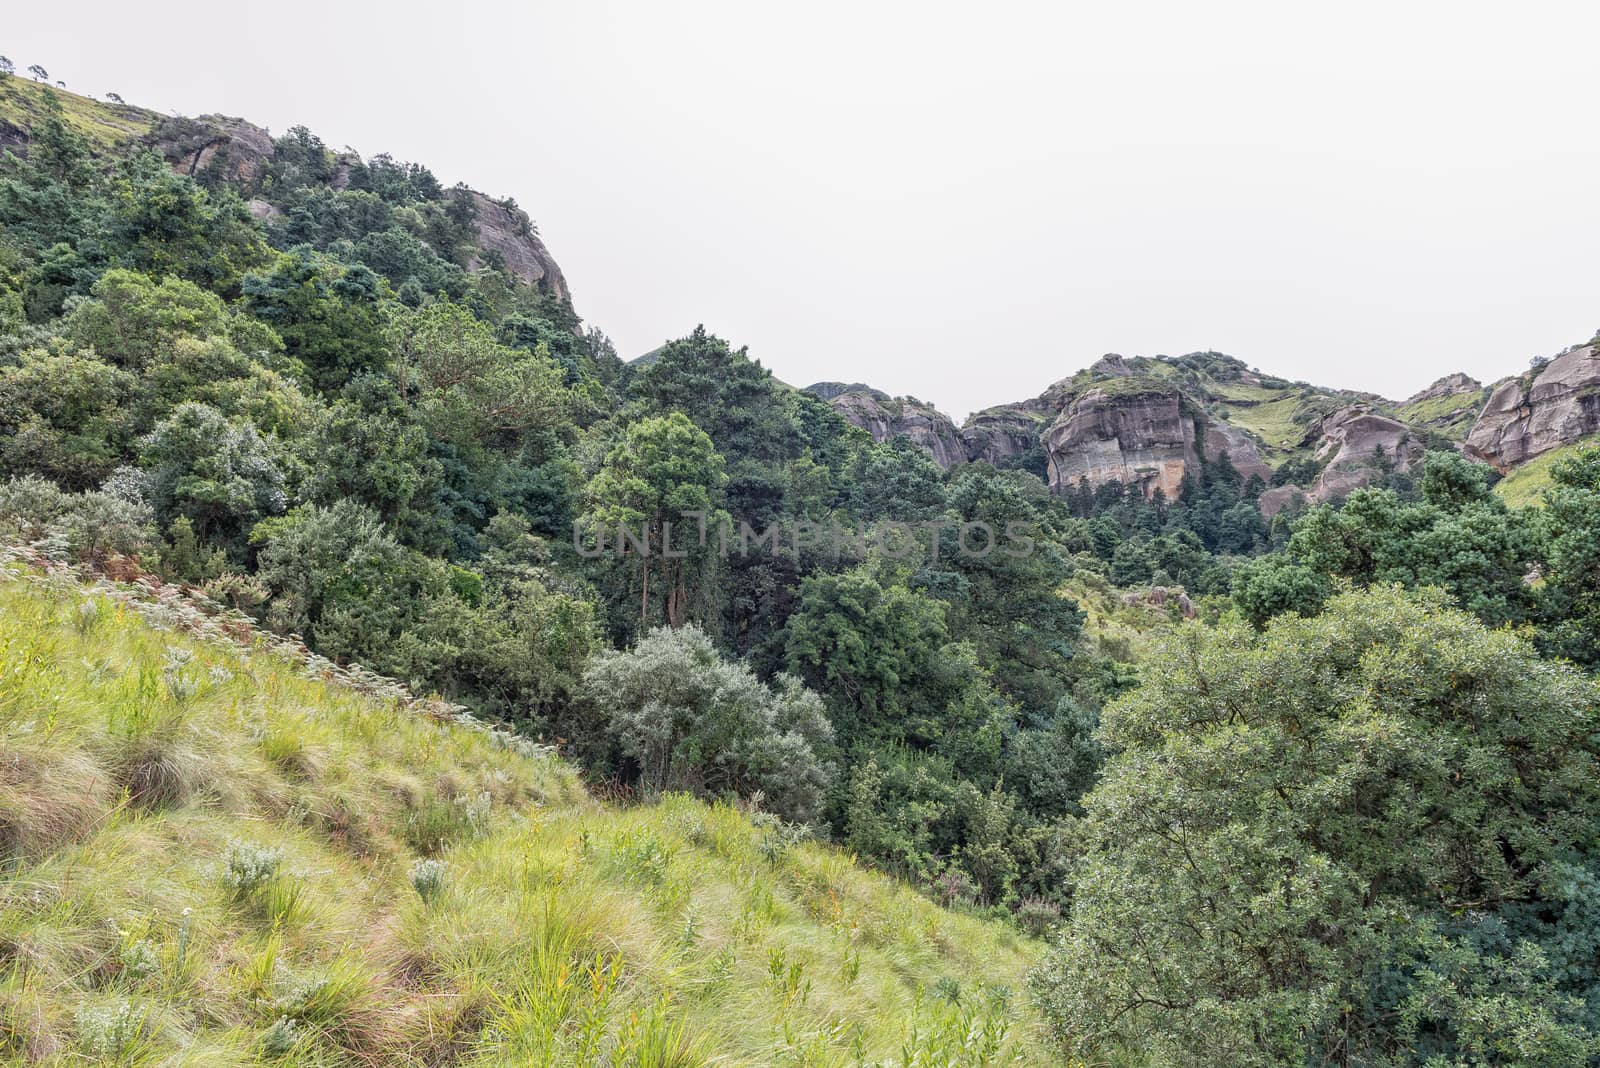 The landscape on the hiking trail to the Grotto near Mahai in the Drakensberg